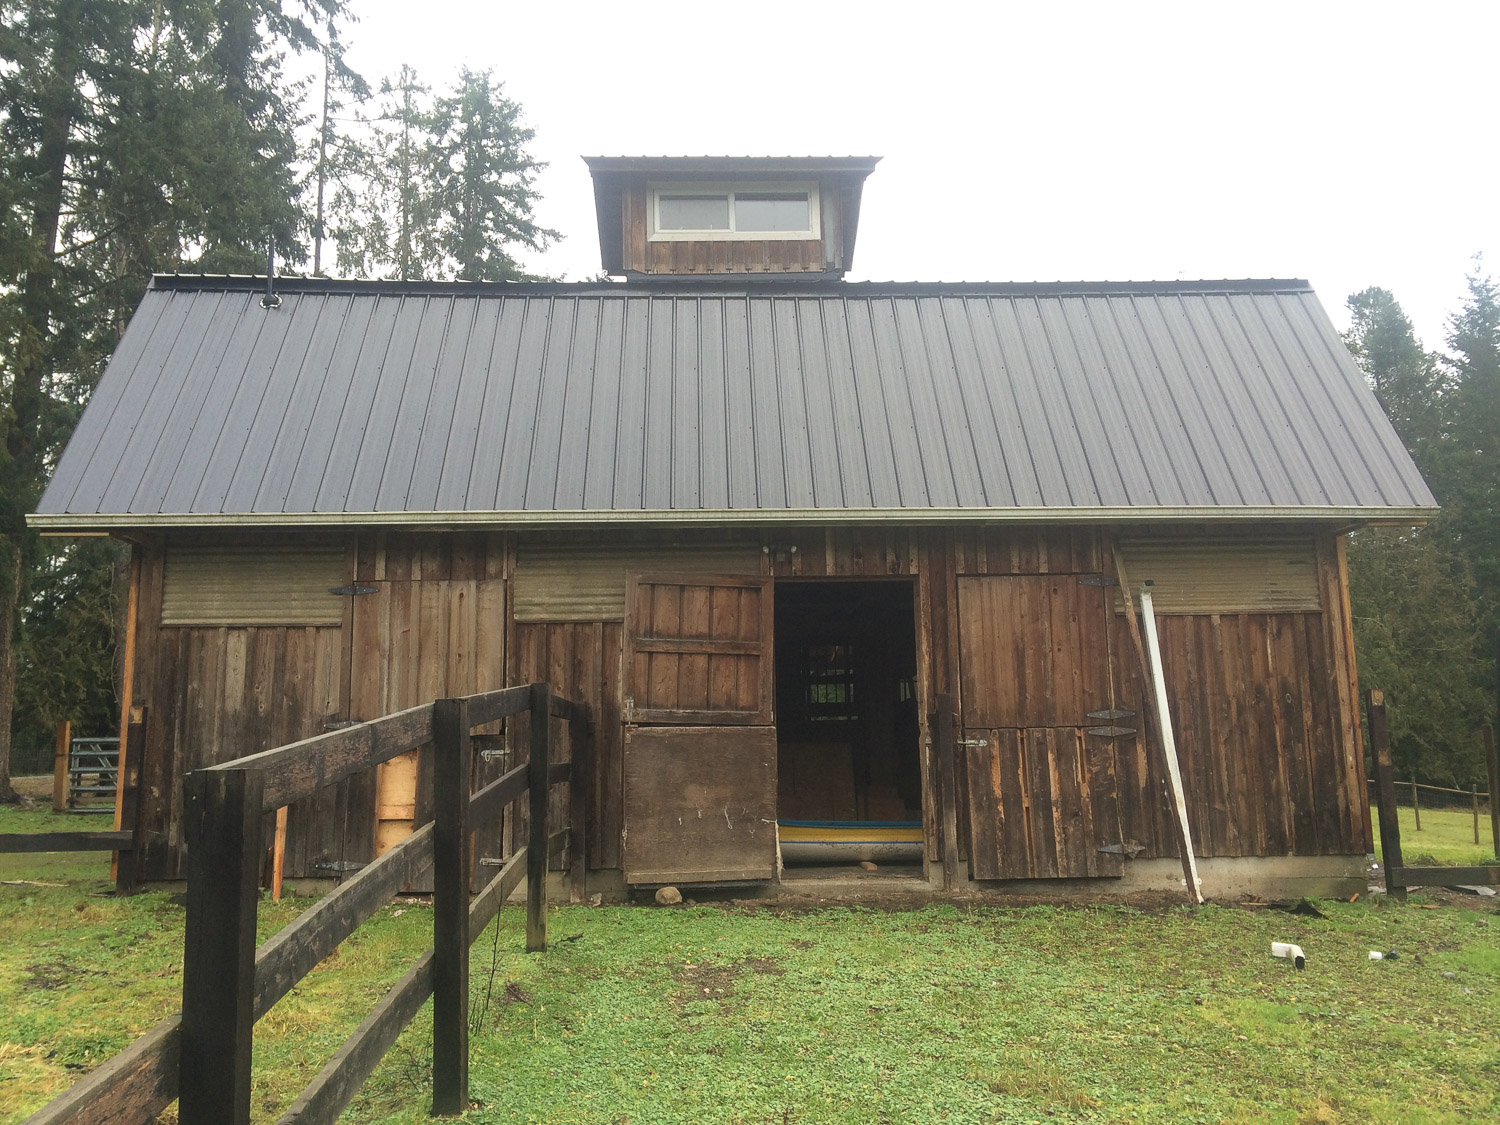 This is what the barn looked like when Hank White originally bought the property.